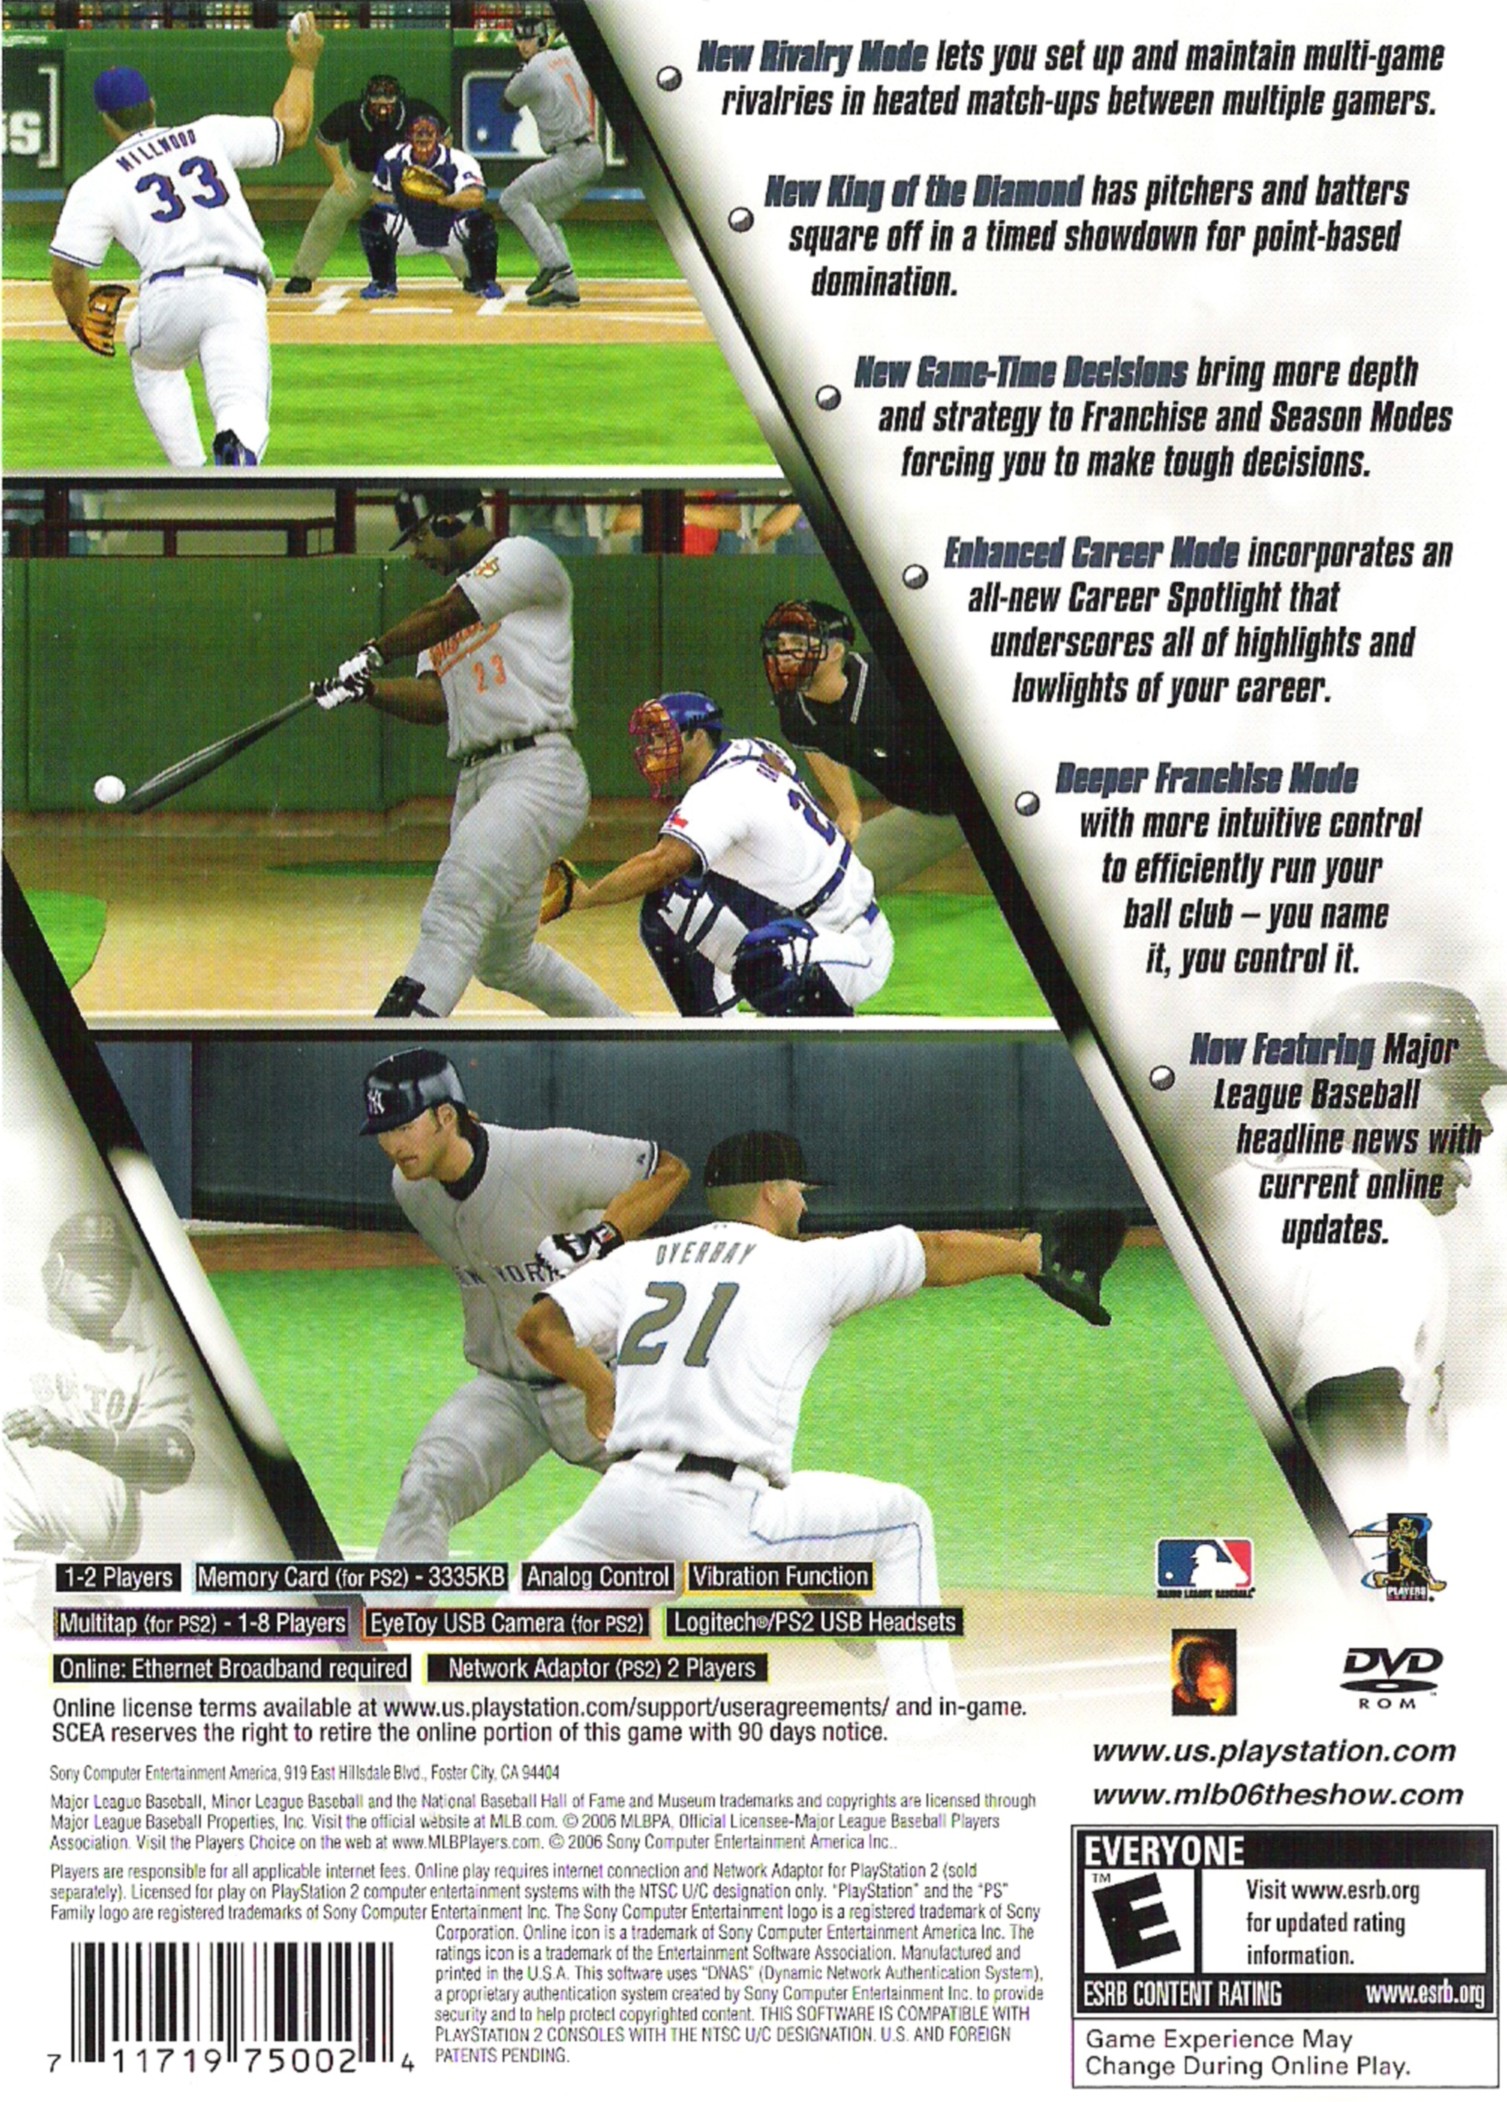 MLB 06: The Show Picture